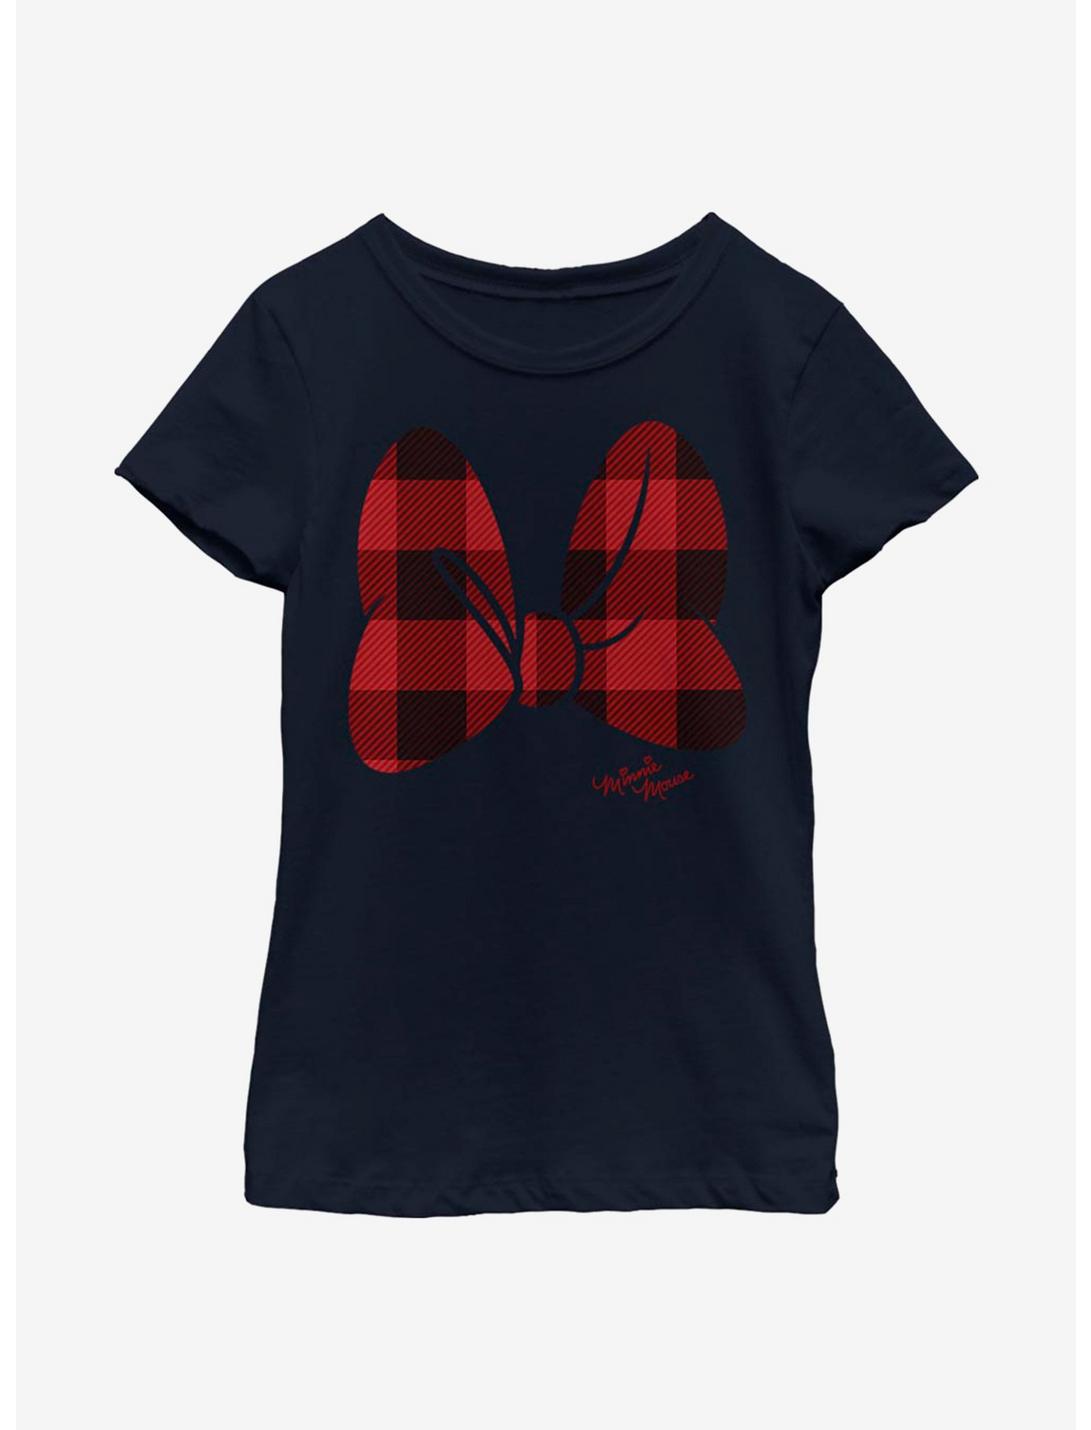 Disney Minnie Mouse Plaid Bow Youth Girls T-Shirt, NAVY, hi-res